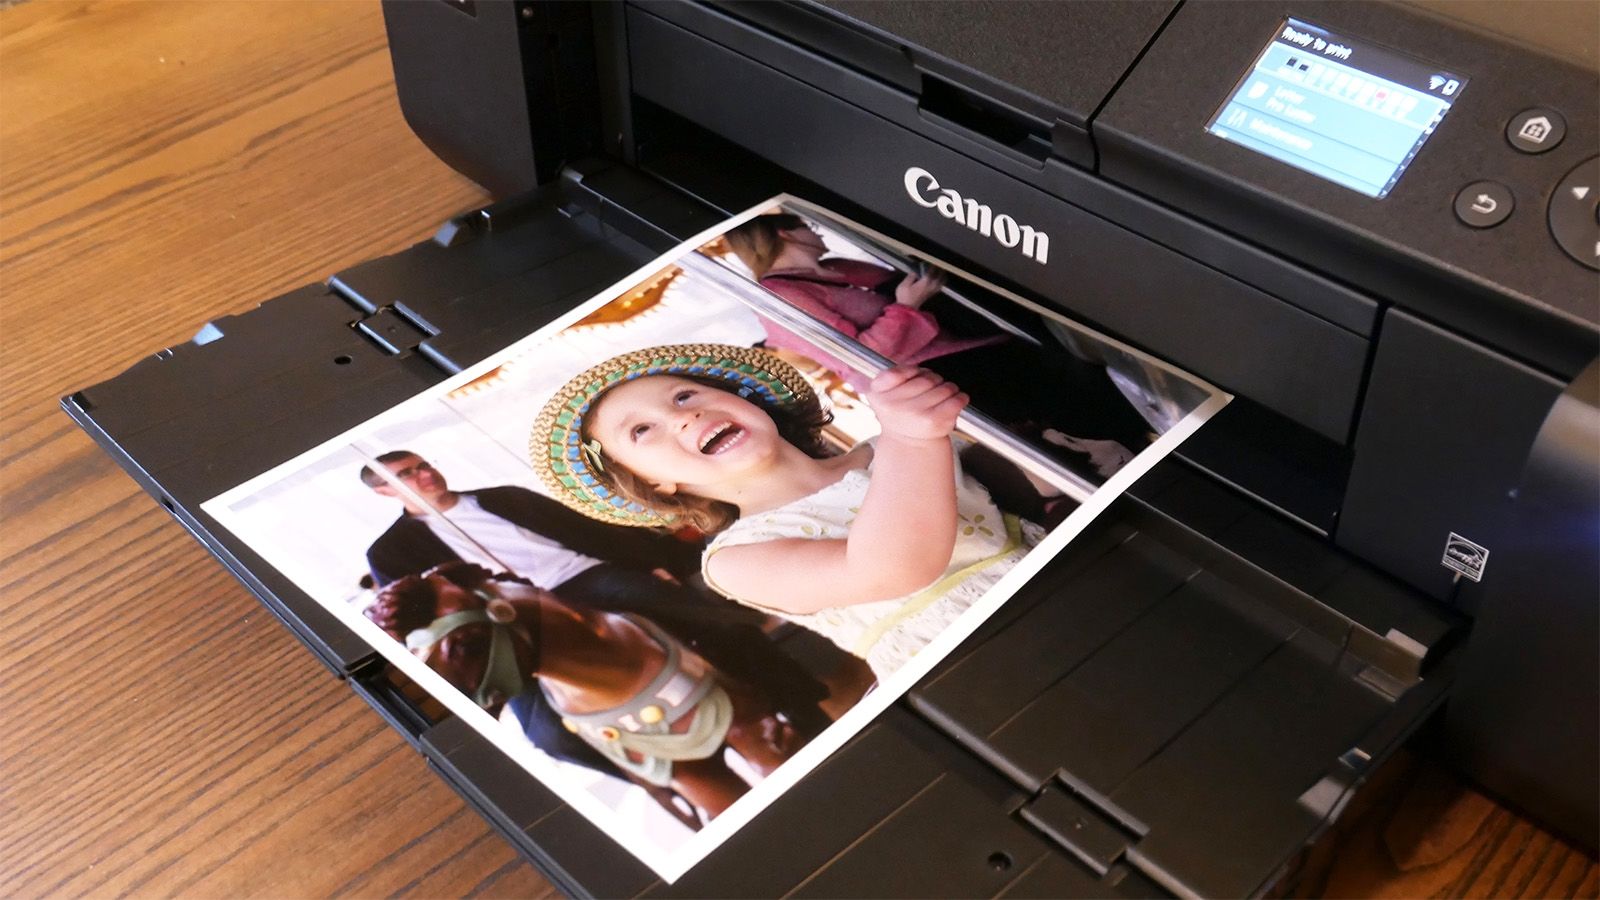 How to Connect an HP Printer to a Wireless Network